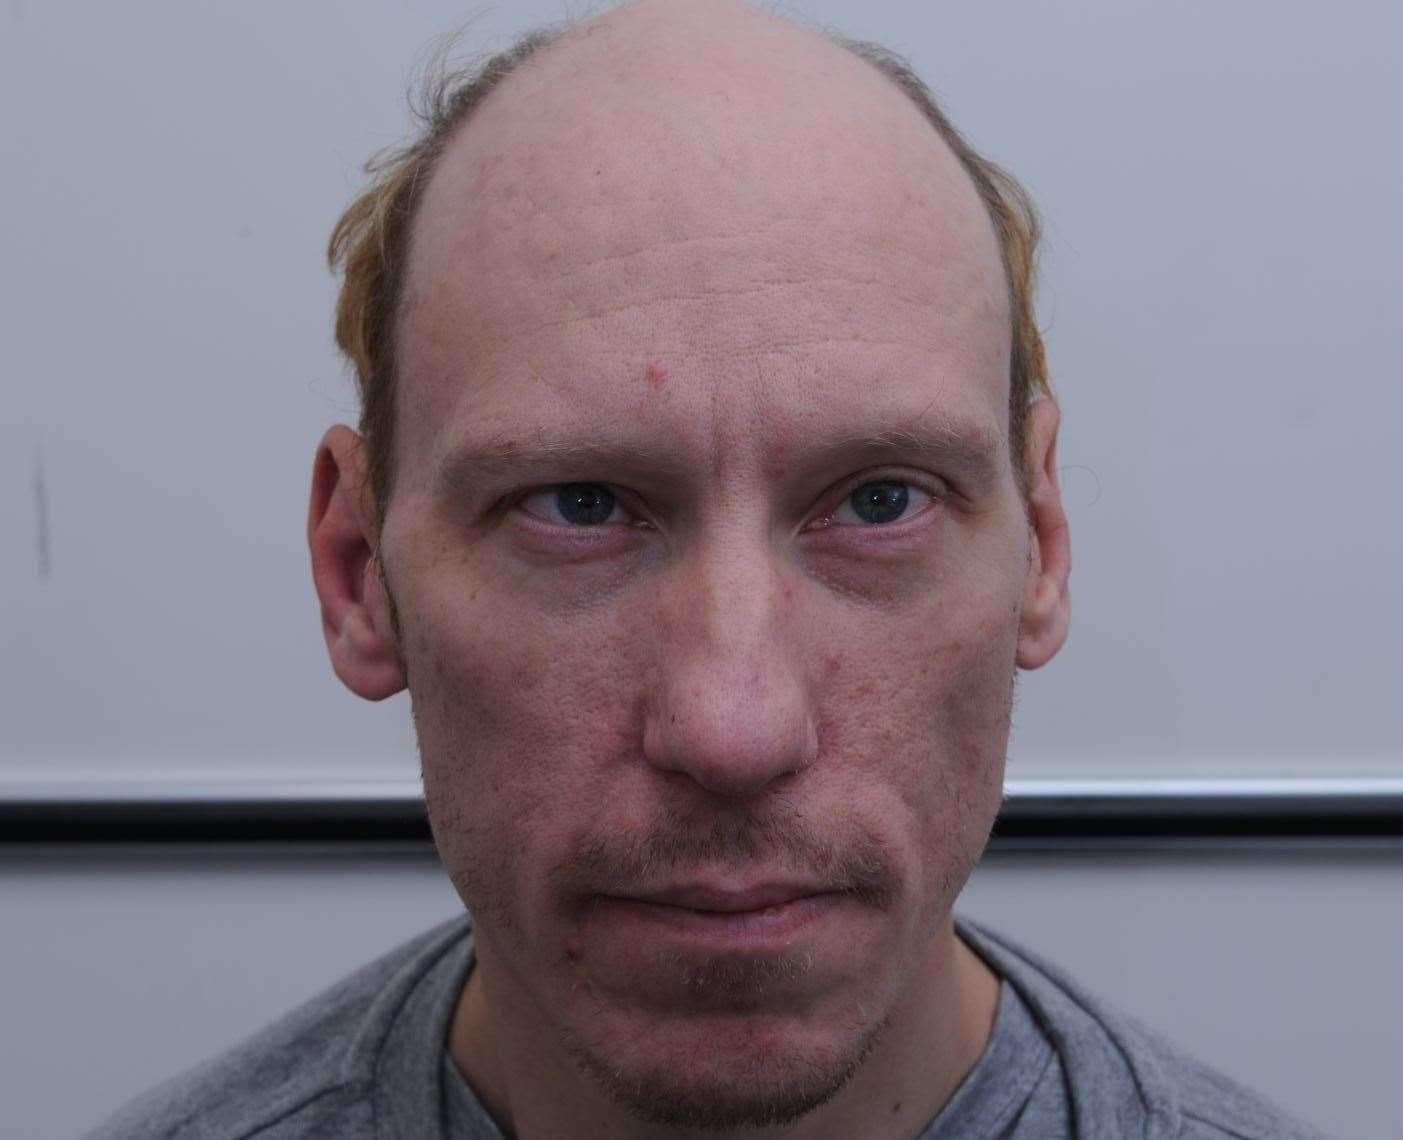 Stephen Port was convicted in 2016